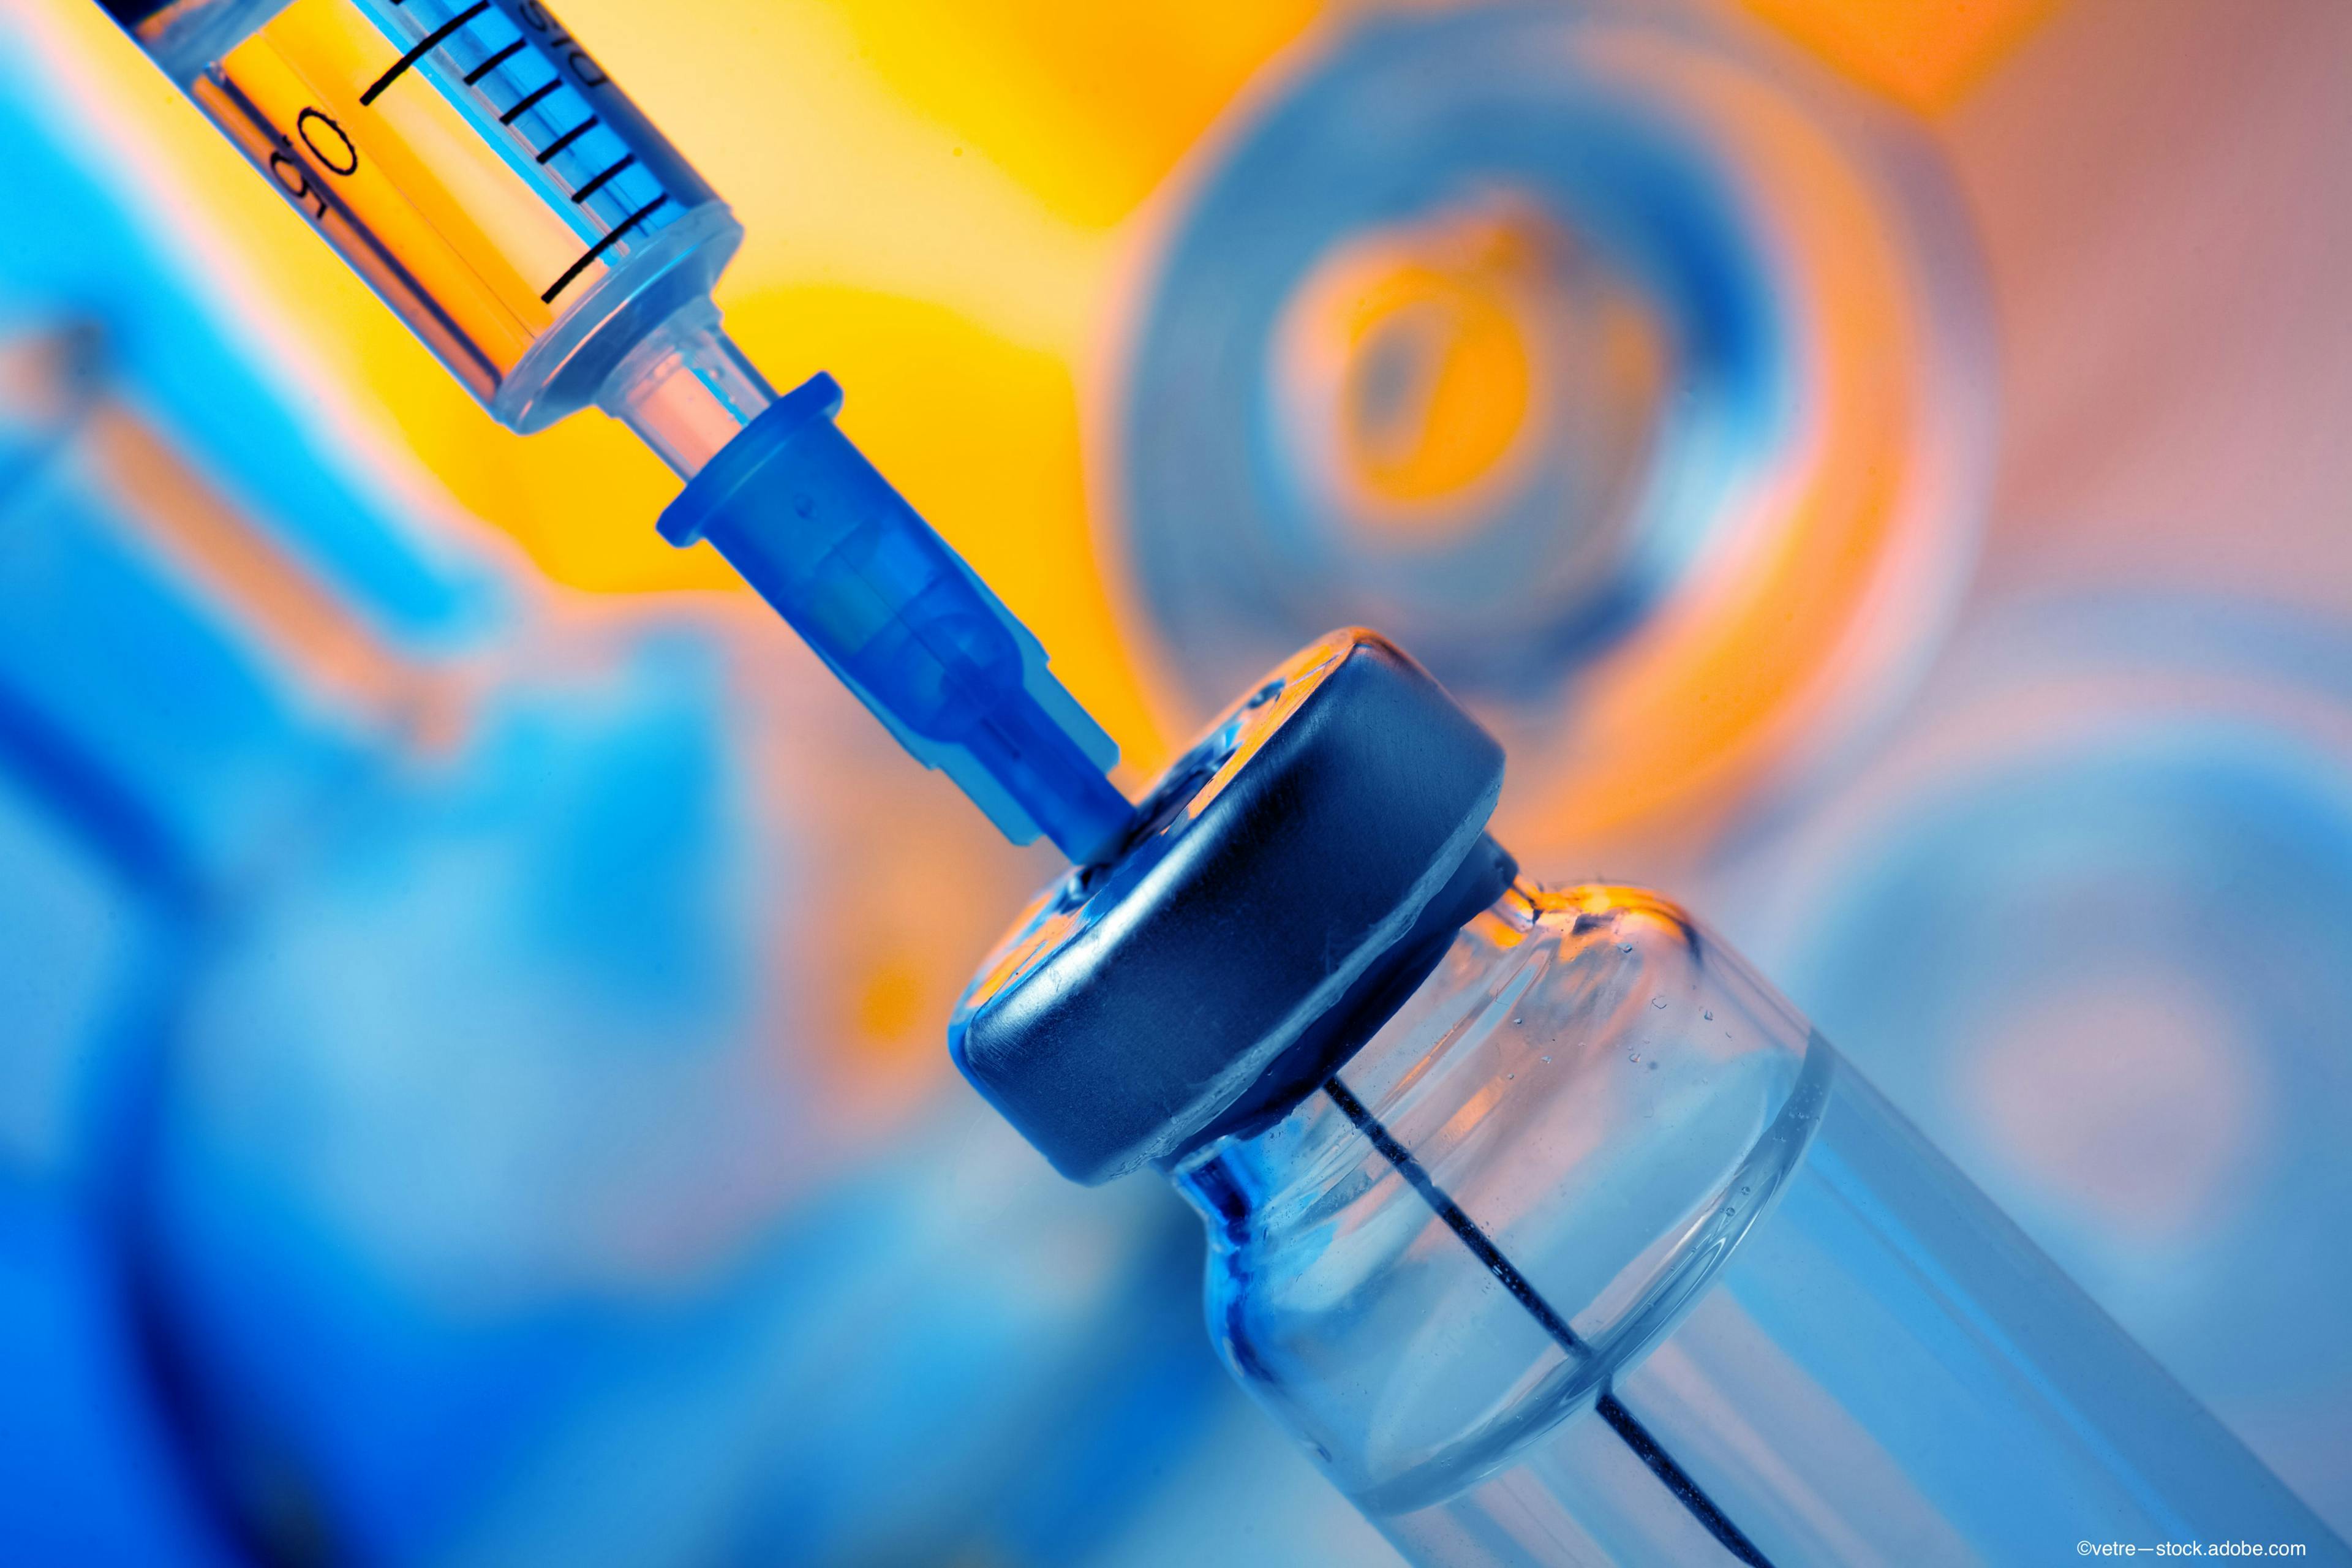 Brolucizumab deemed noninferior to aflibercept for DME treatment, fewer injections required